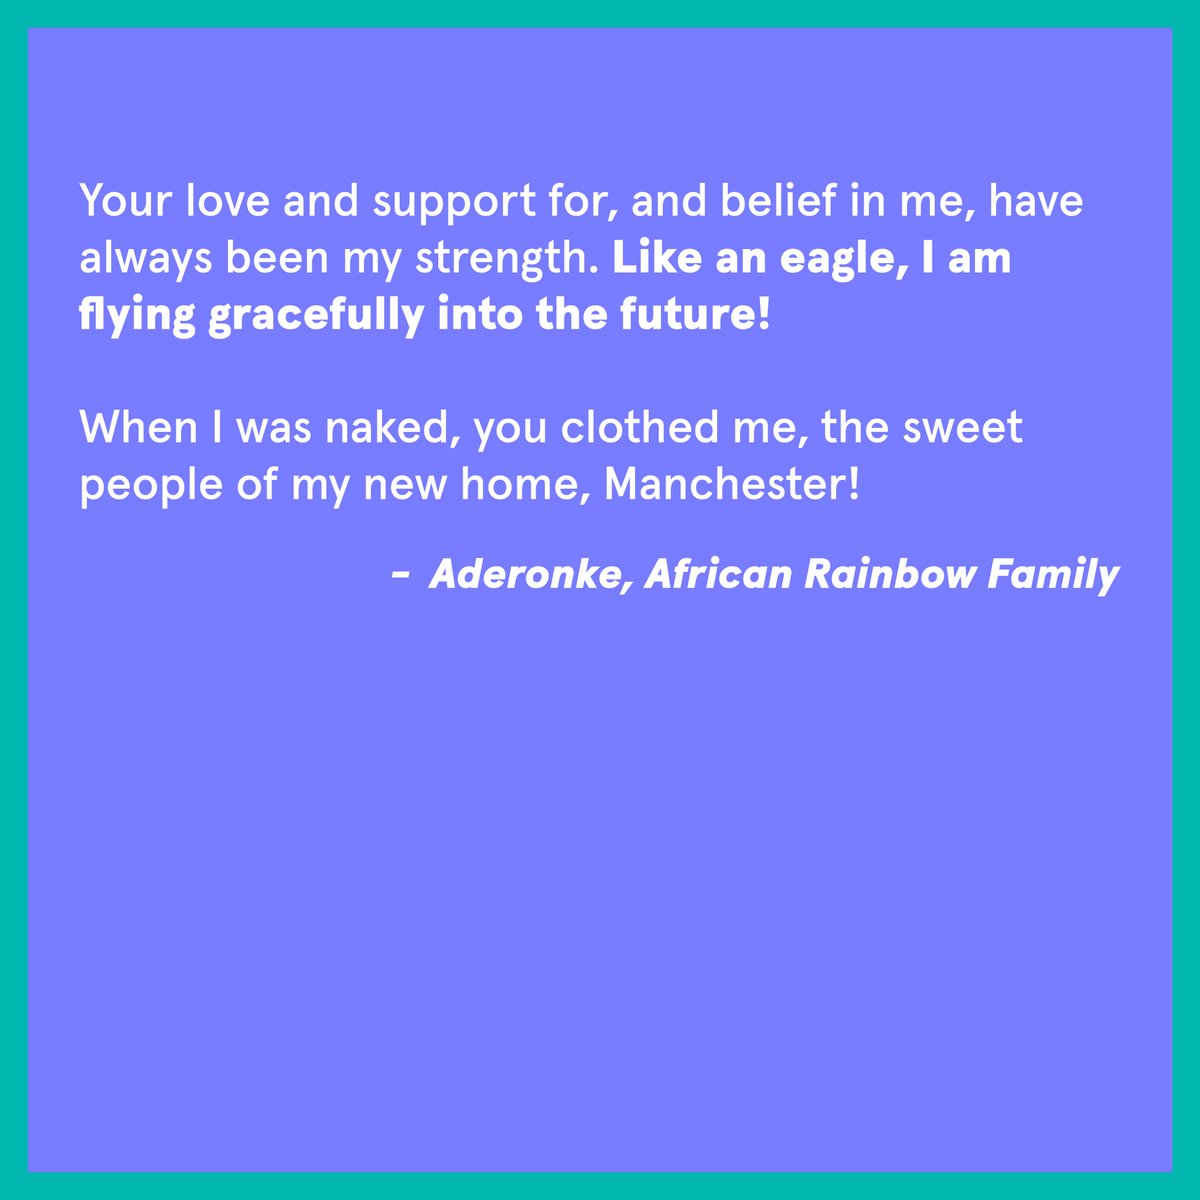 Storytelling makes us human. Inspired by our recent collaboration with @KINDSnacksUK, our partner, @AfricanRainbow1, shared this story of kindness with us about their journey when arriving to the UK. You Clothed Me was written by Aderonke, Founder of African Rainbow Family.